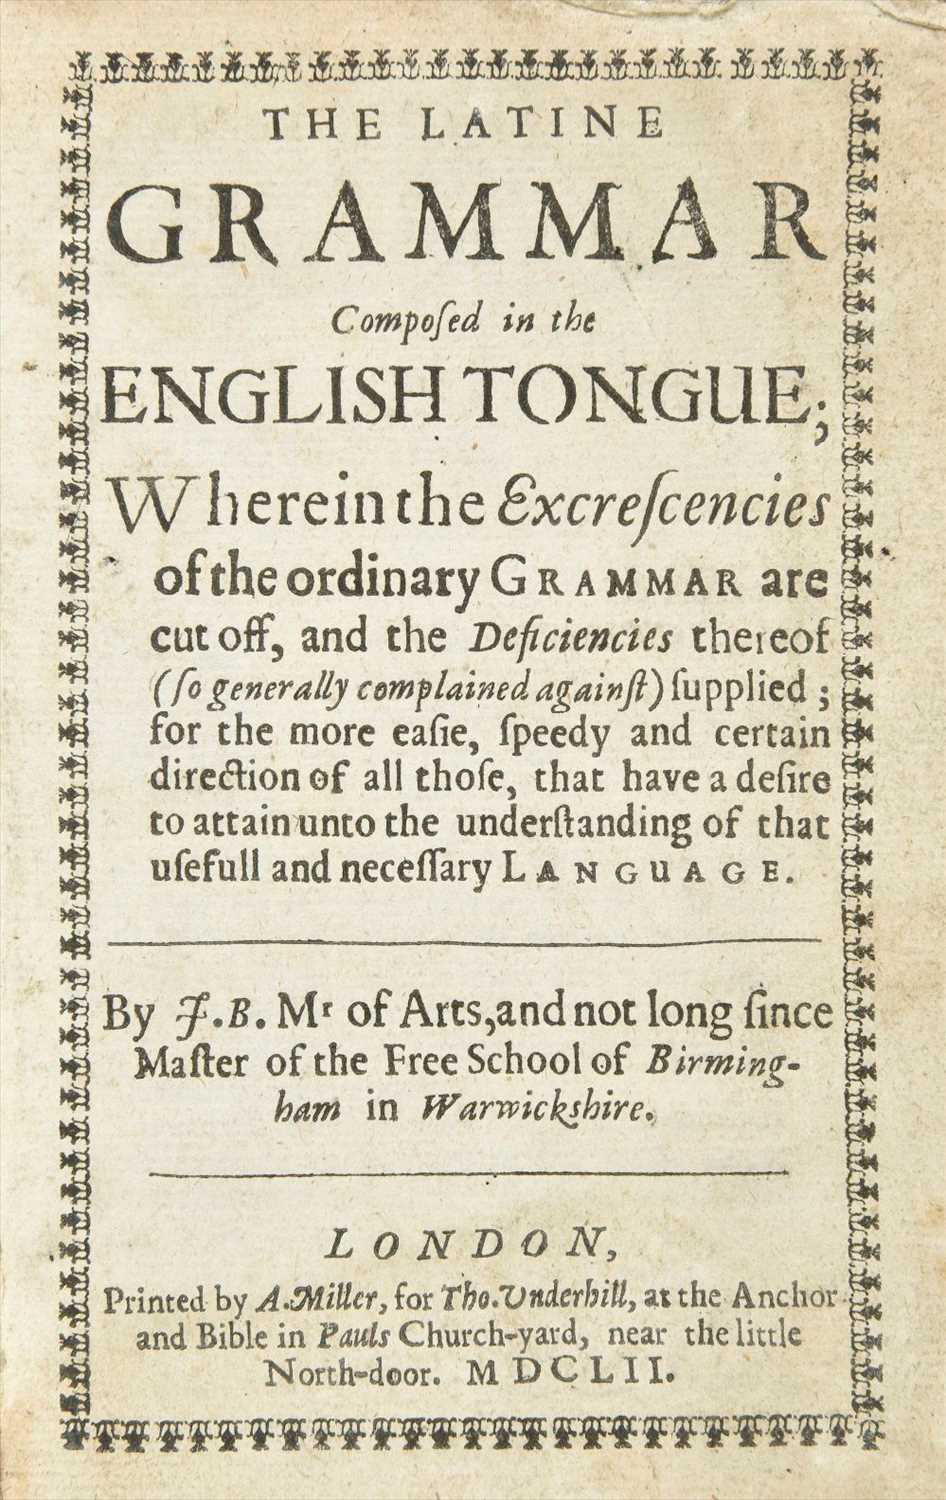 Lot 278 - Barton (John). The Latine Grammar composed in the English Tongue, 1st edition, 1652